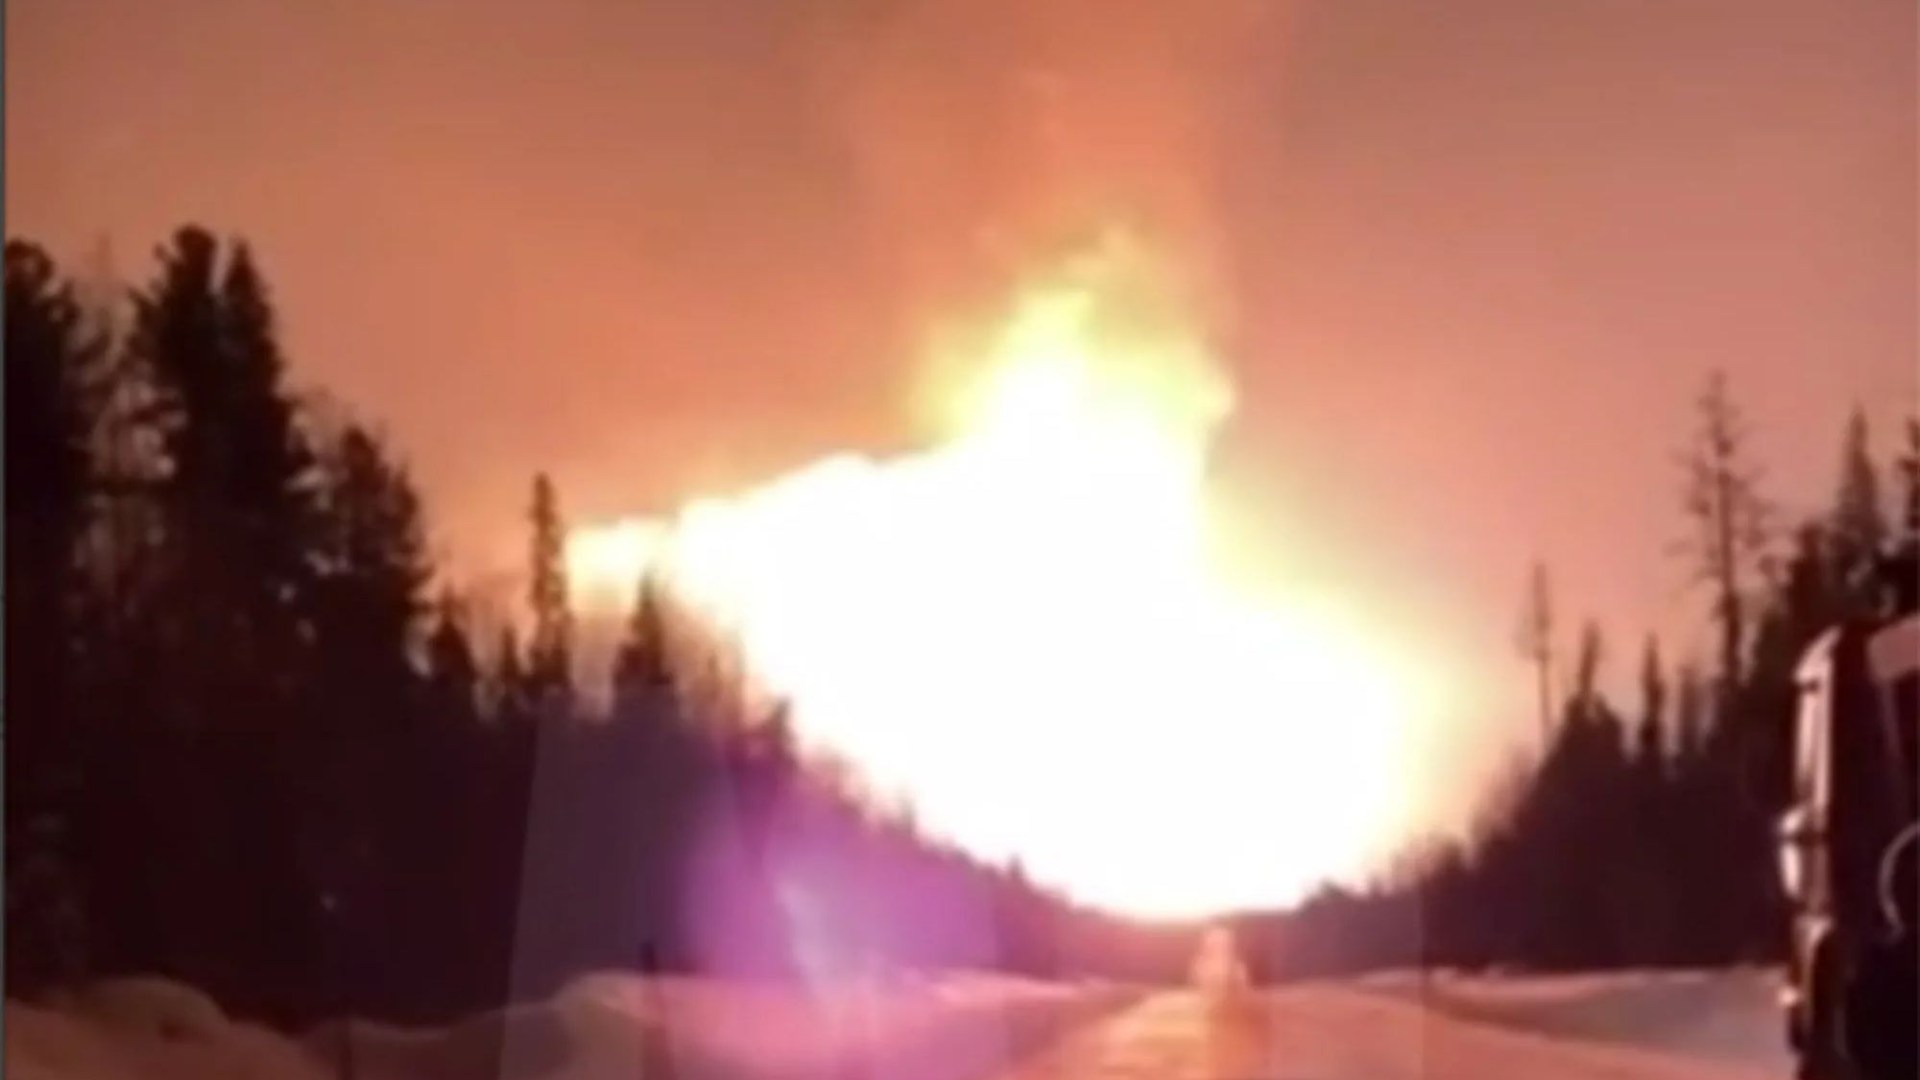 Putin’s key gas pipeline rocked by massive mystery explosion for second time in months sending fireball into the sky [Video]